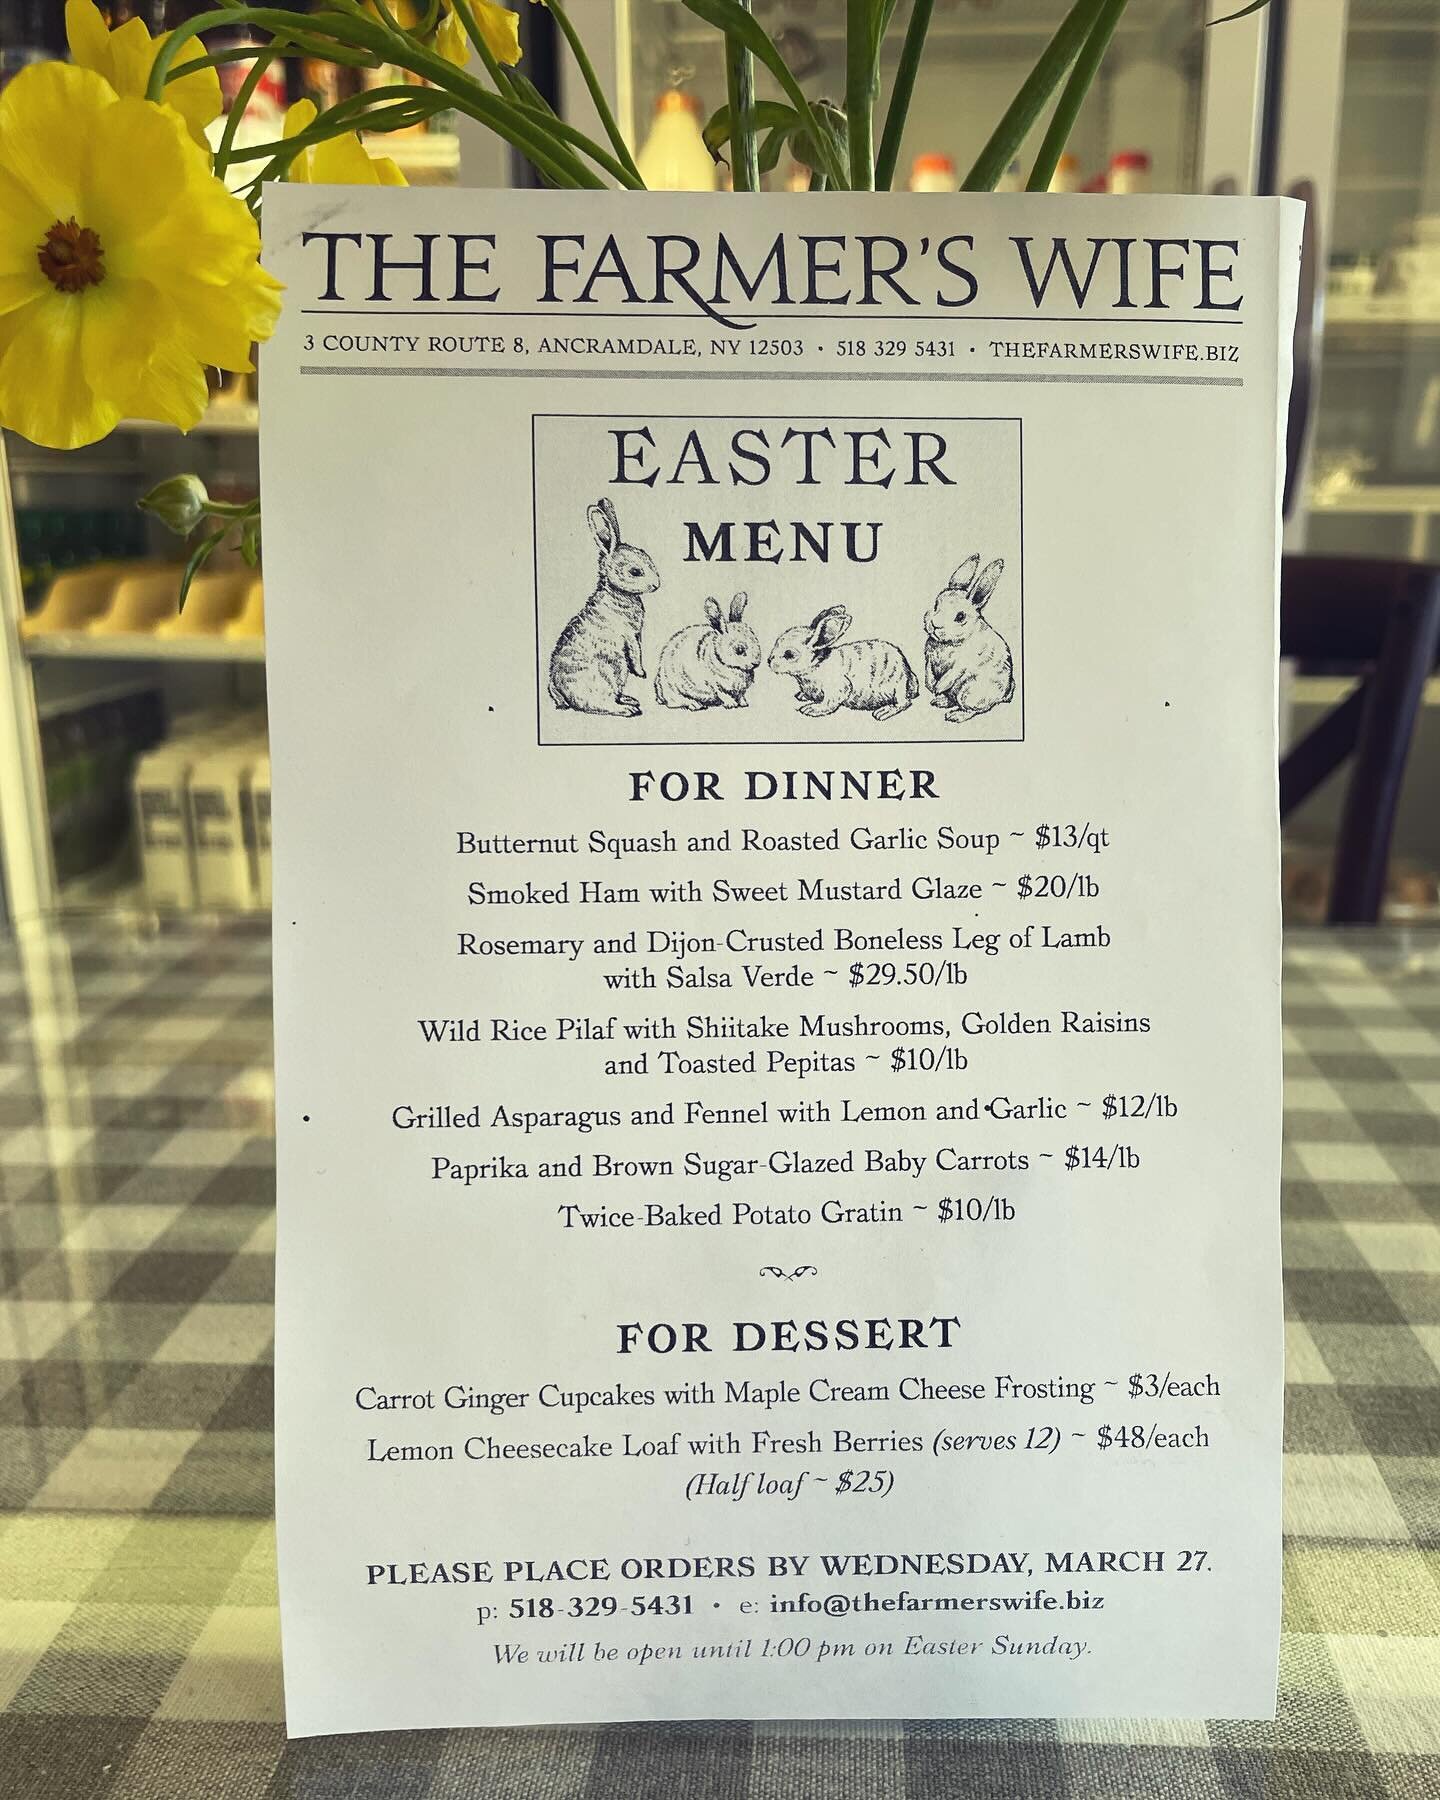 Our Easter Dinner menu is LIVE. 
1. Call to place your orders by Wednesday, March 7th for pick-up between 9am and 1pm on Easter Sunday.

2. Swipe to see this weekend&rsquo;s specials

3. Stop in, say hi, and check the case for your favorite prepared 